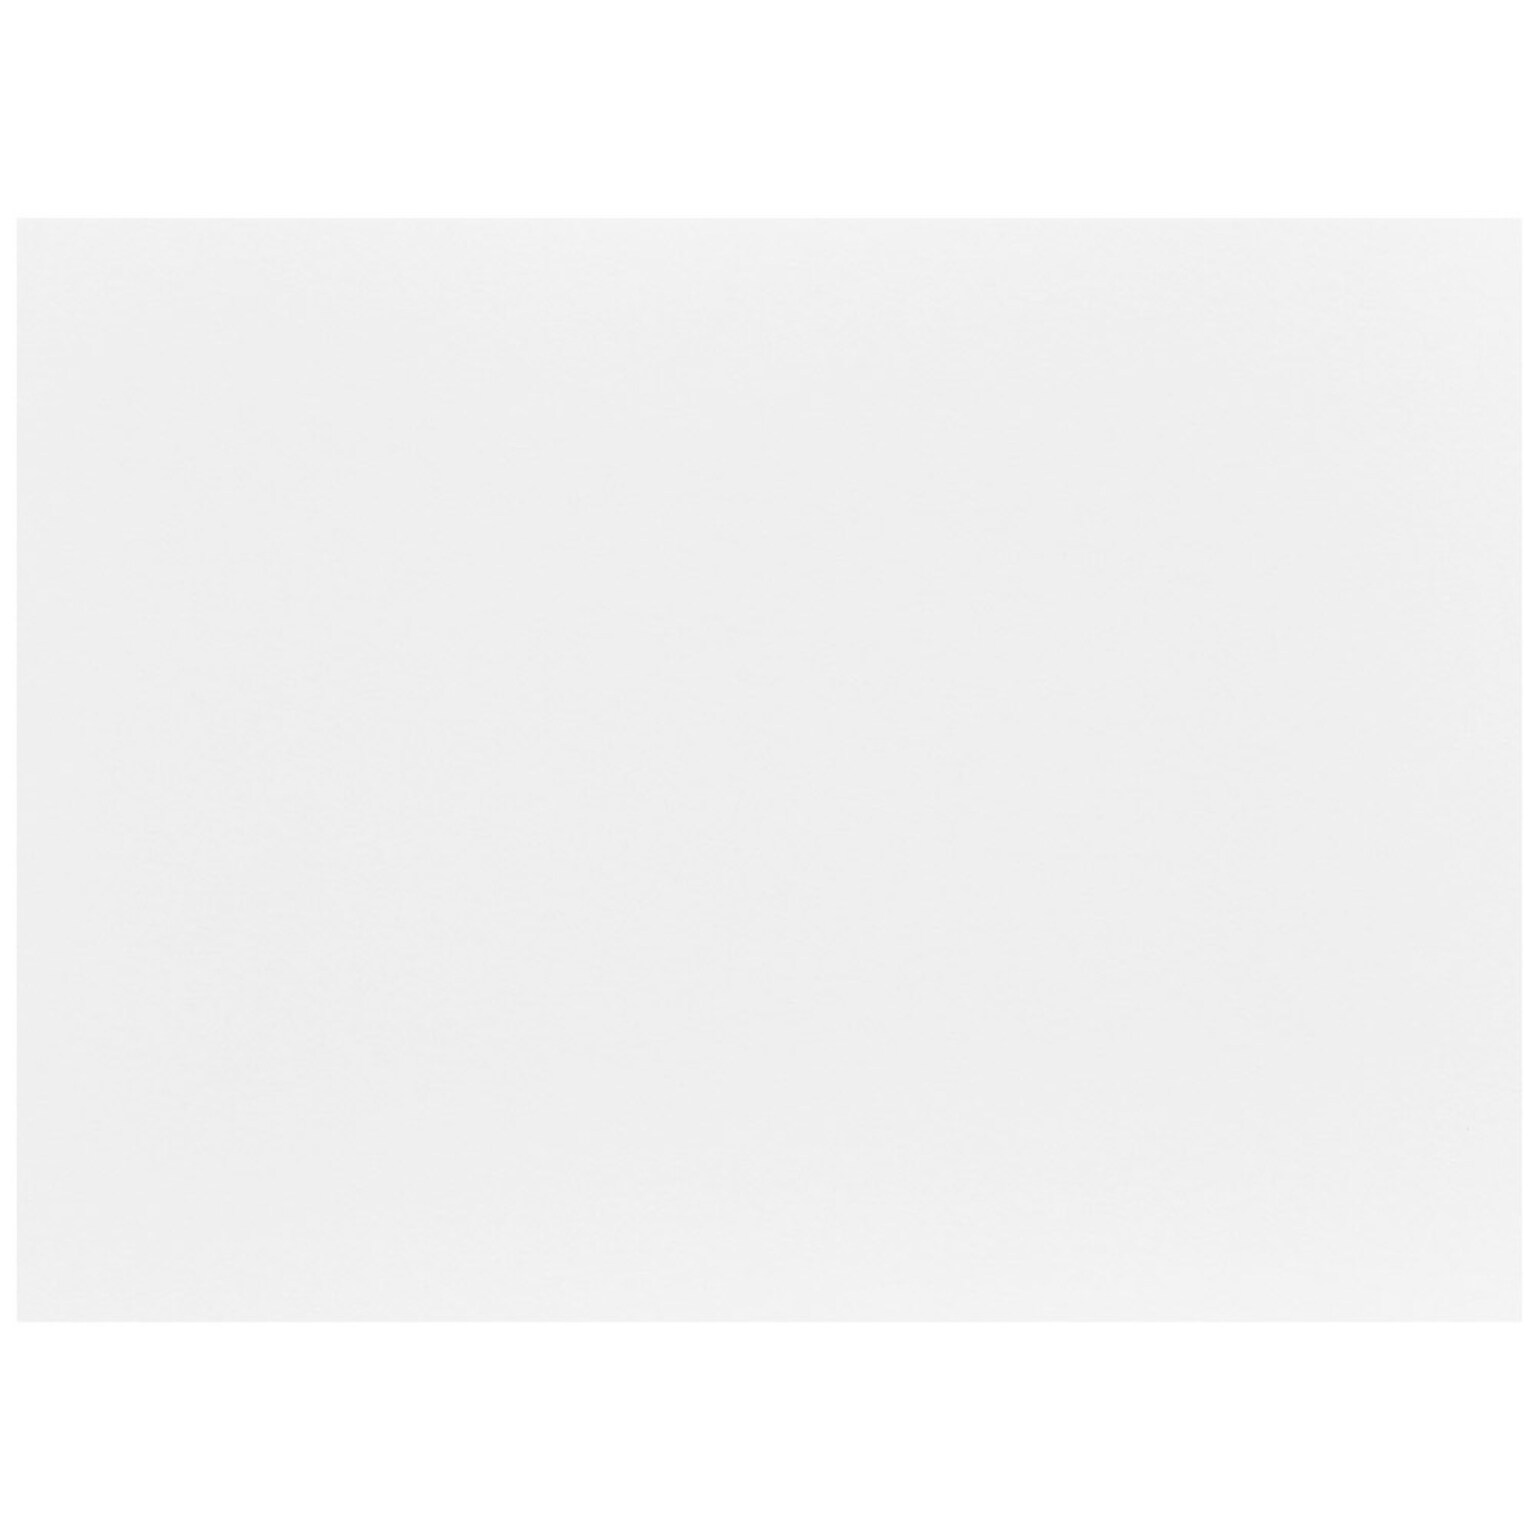 JAM Paper Smooth Personal Notecards, White, 100/Pack (1751006)